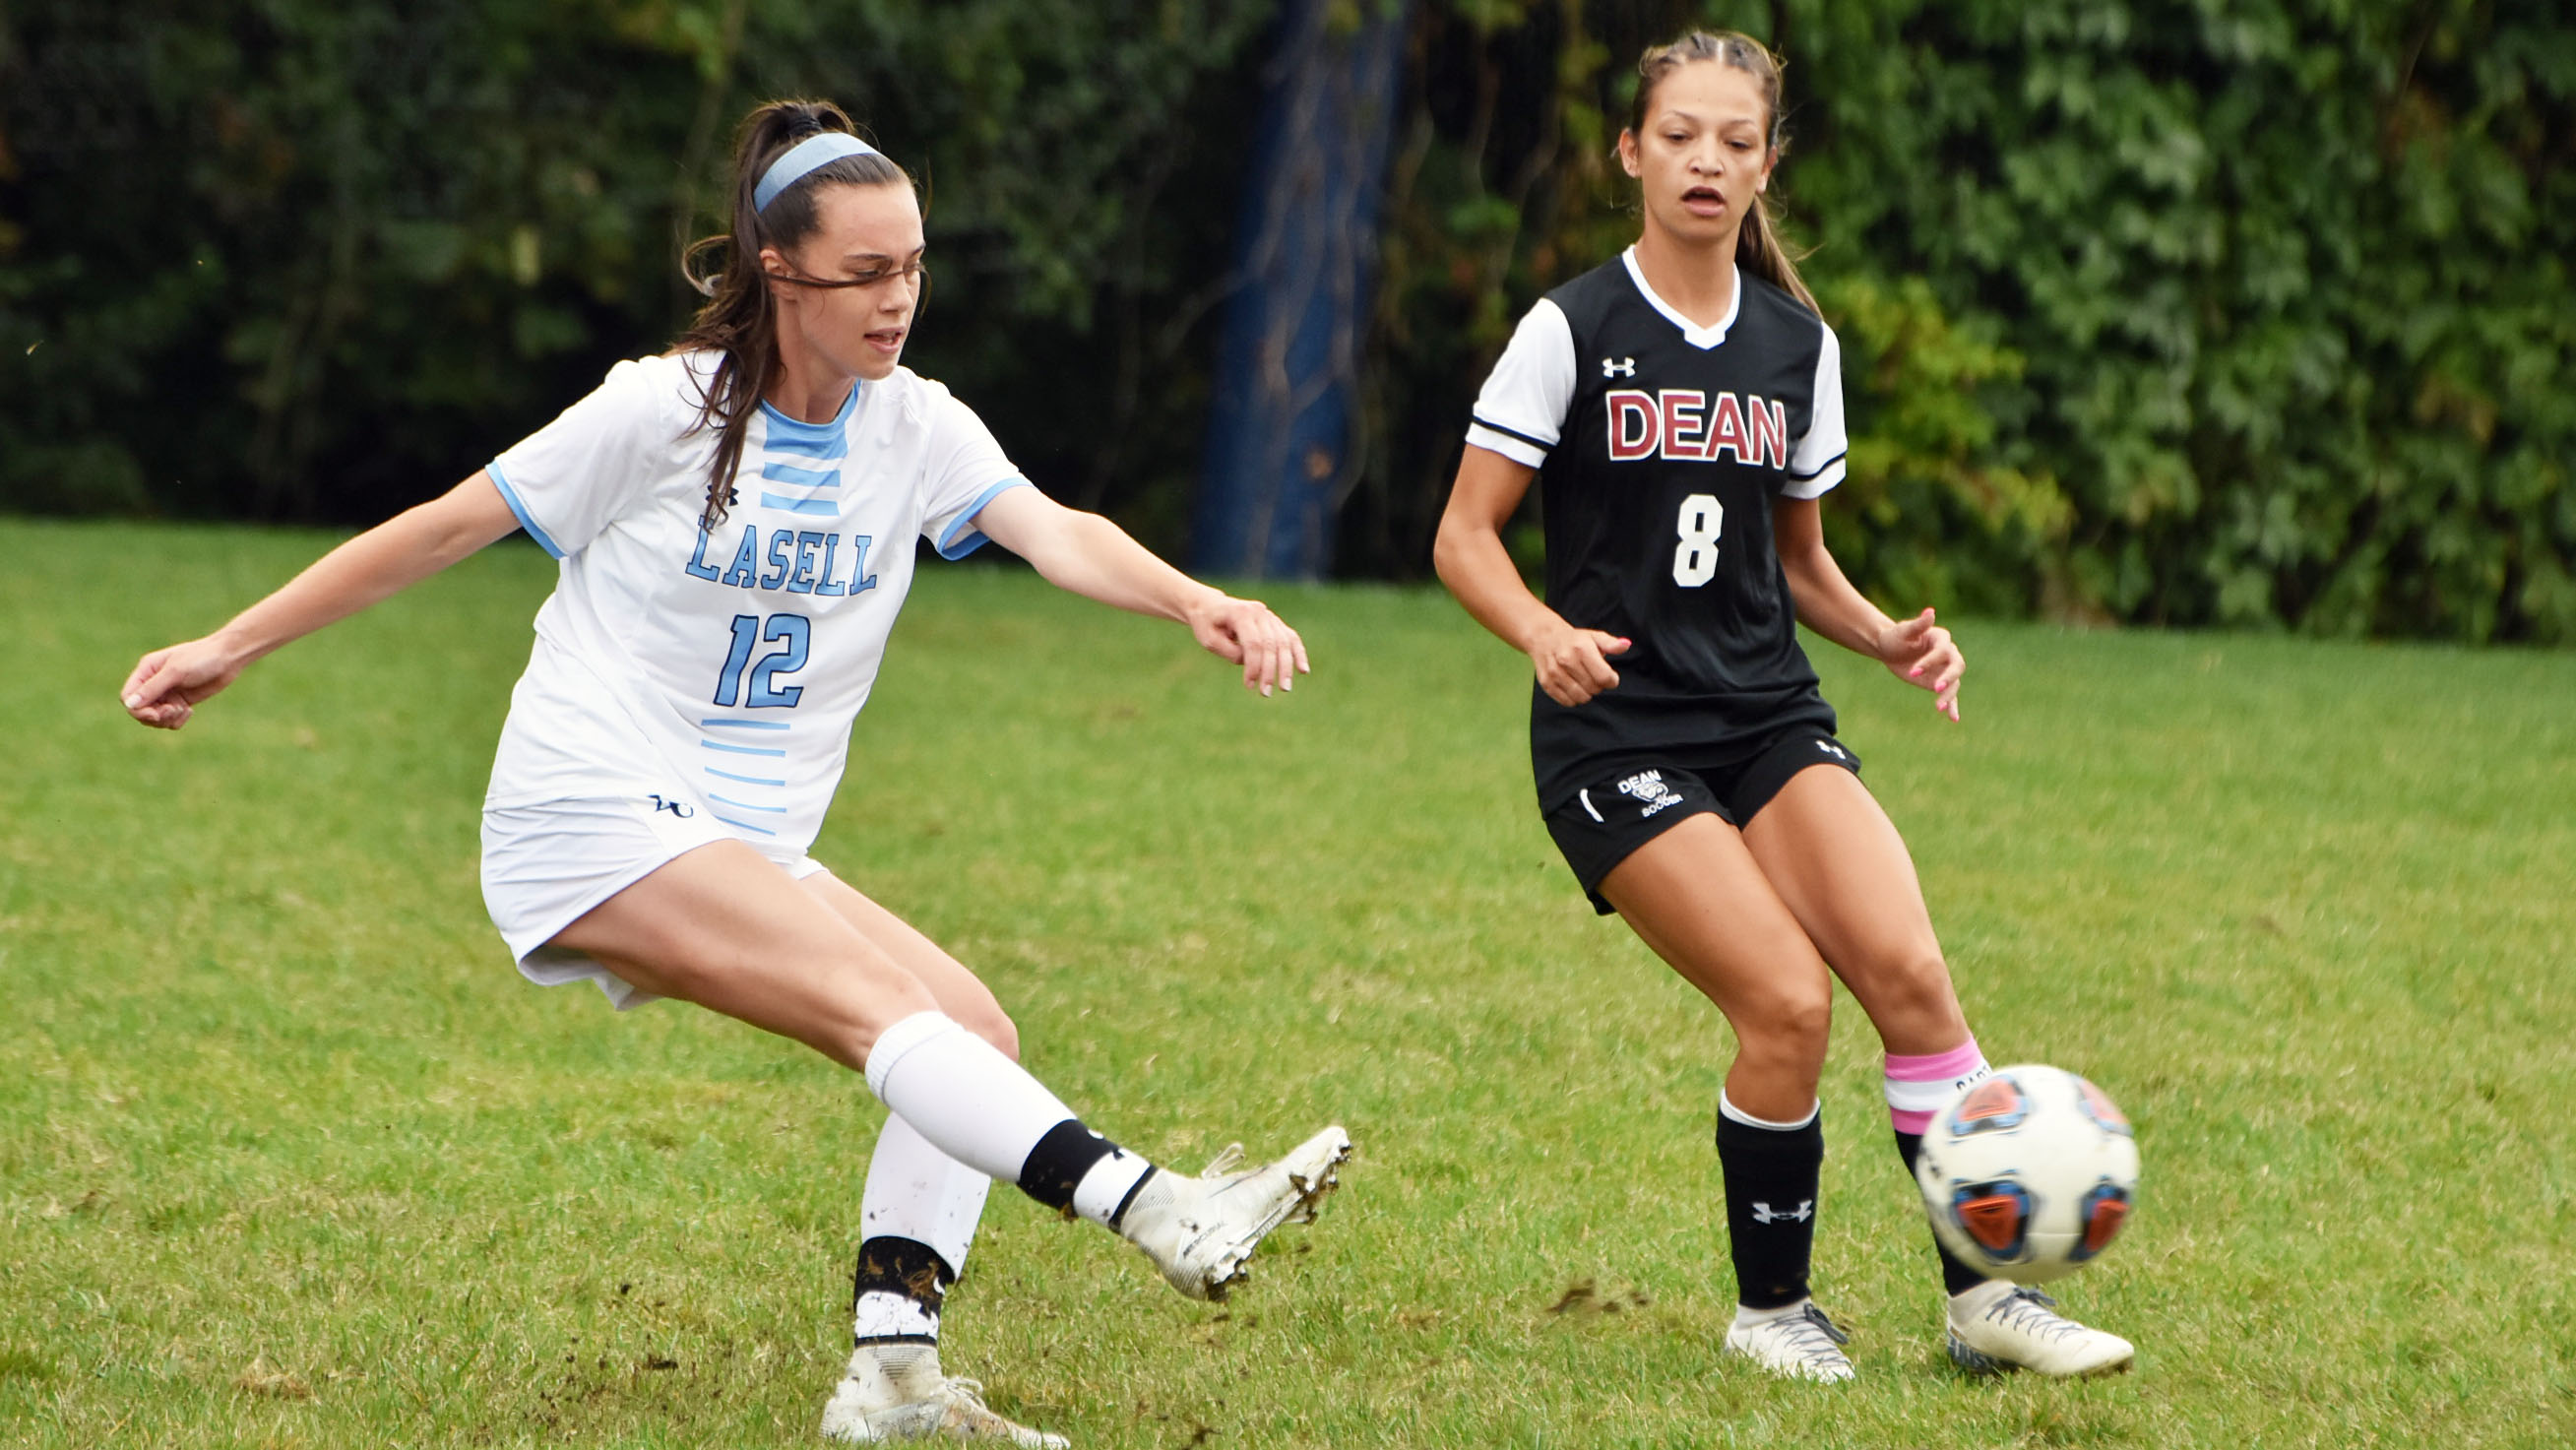 WSOC: Lasell dominant in first home game of the year